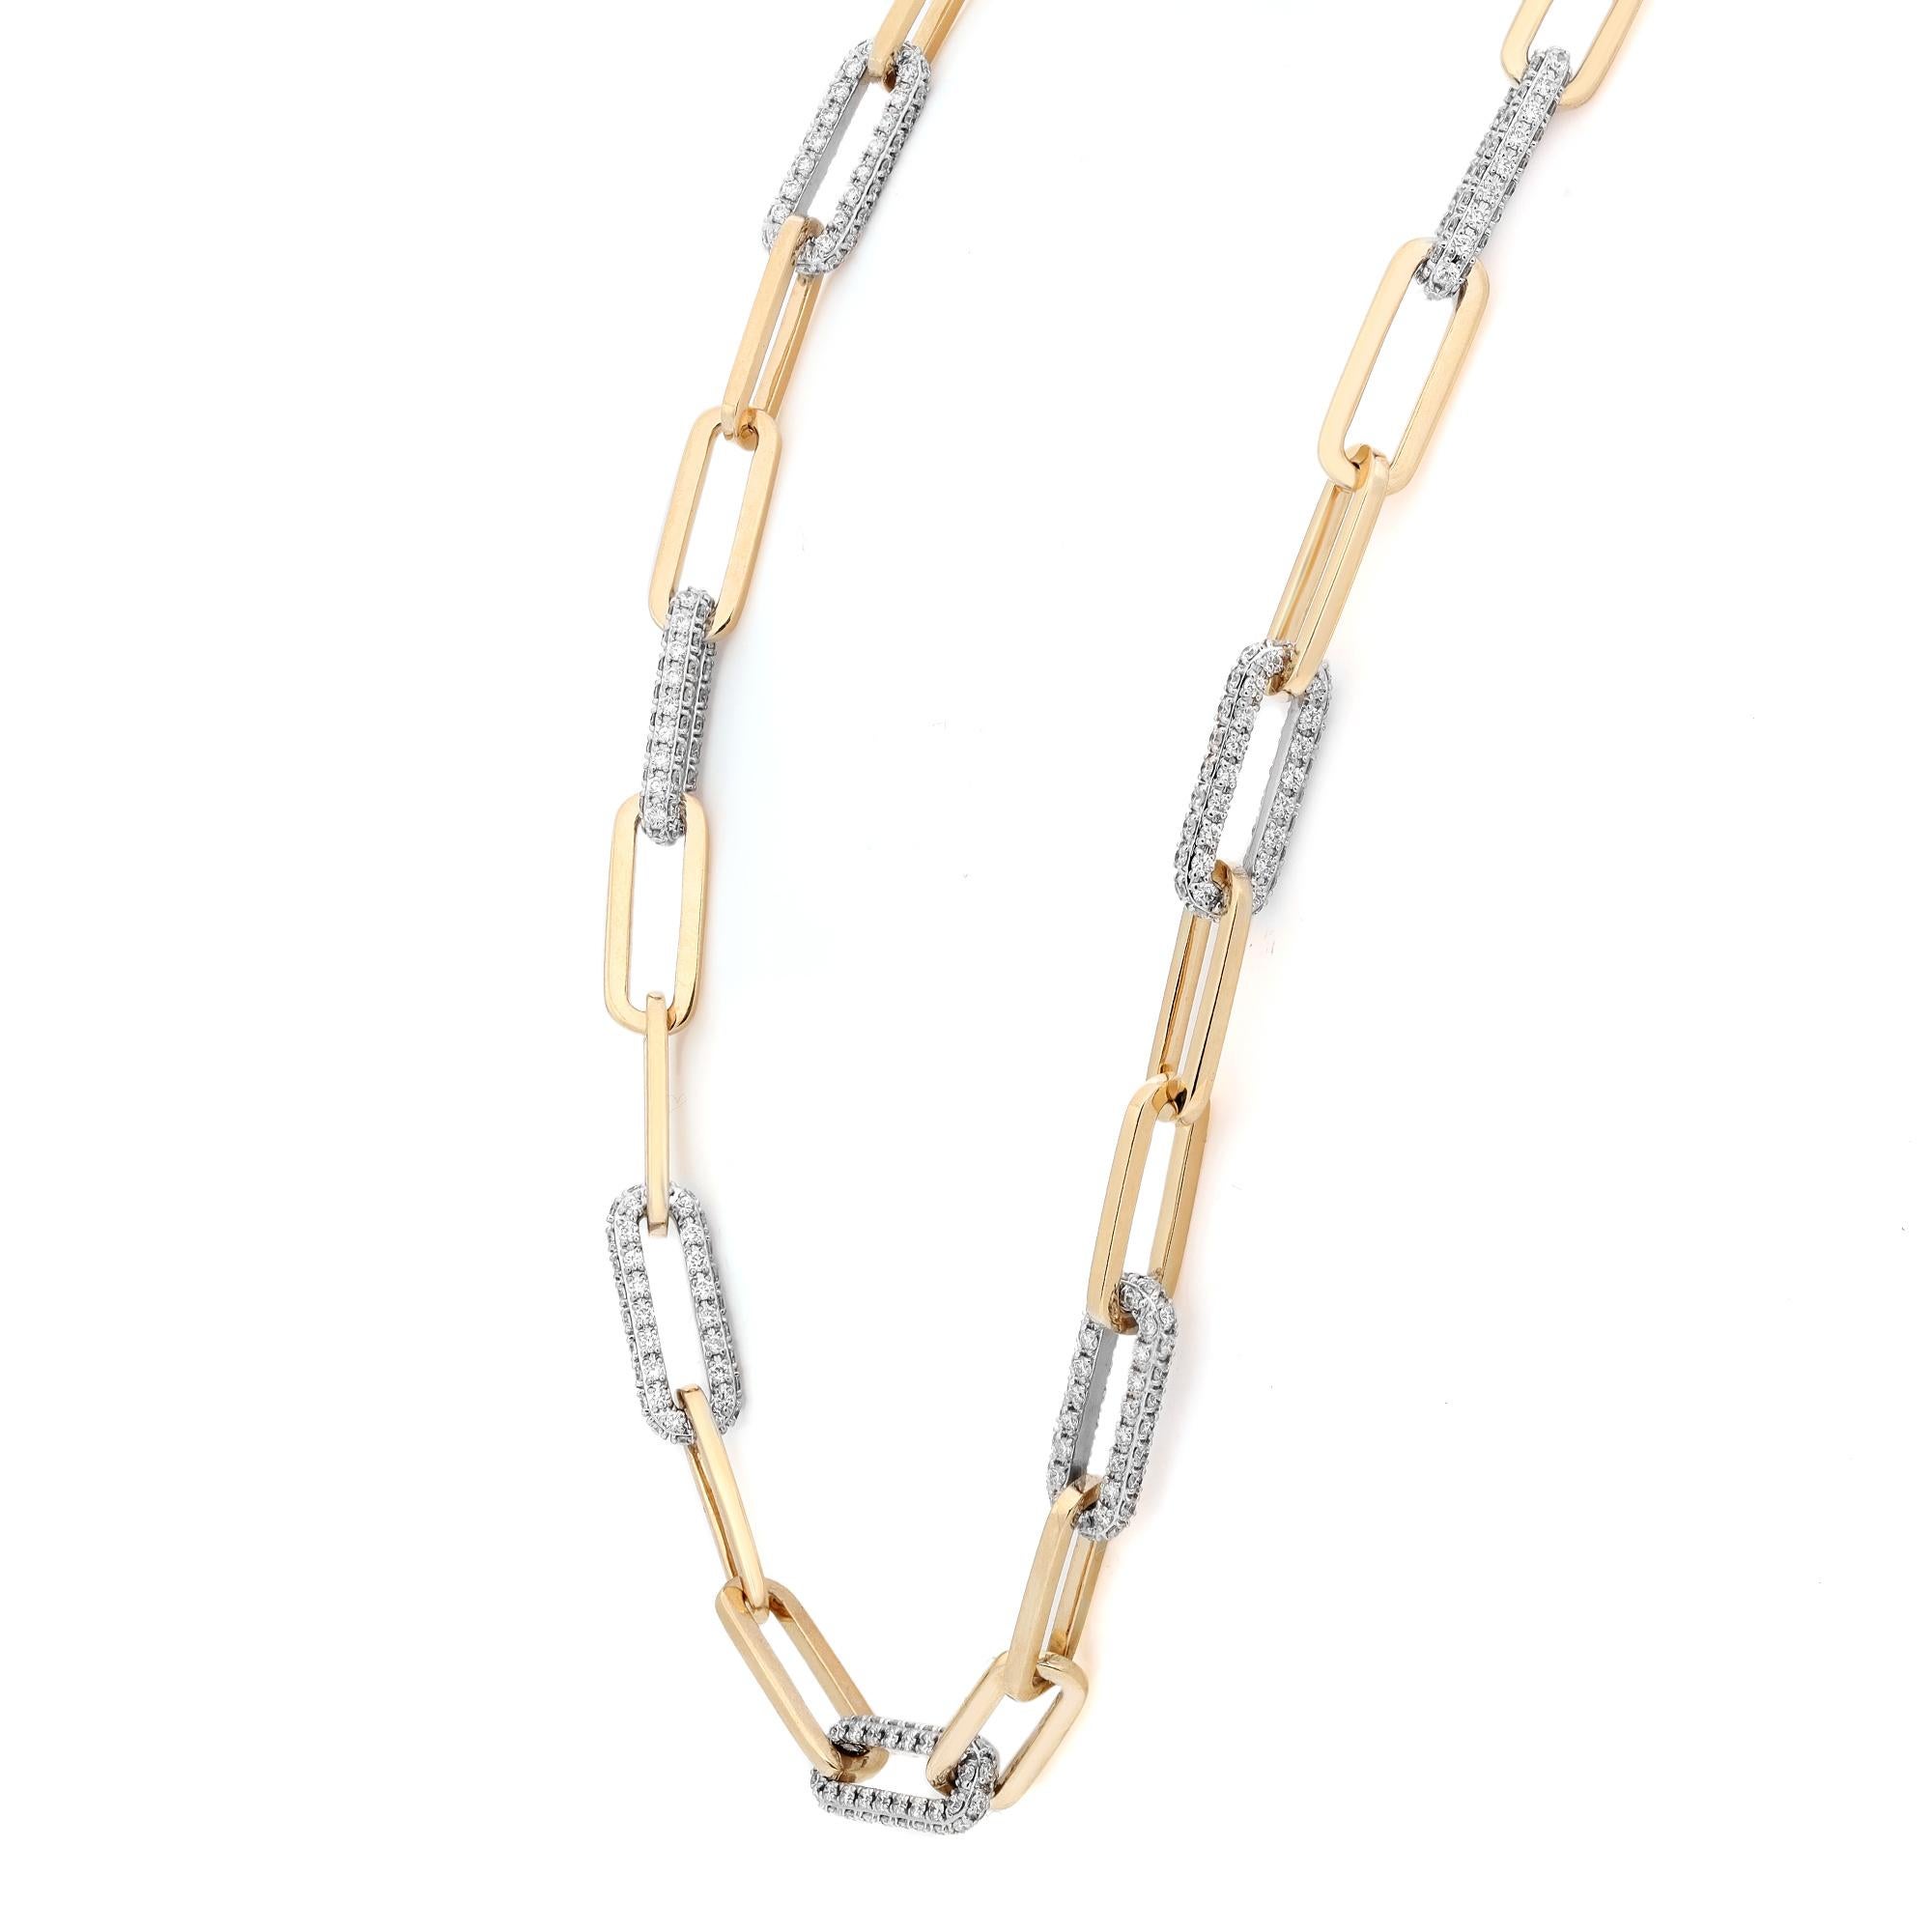 This trendy and chic necklace features paper clip links crafted in 14k yellow gold with alternate diamond studded paper clip links crafted in 14k white gold. Total diamond weight: 7.43 carats. Diamond quality: color G-H and clarity VS-SI. Length: 17